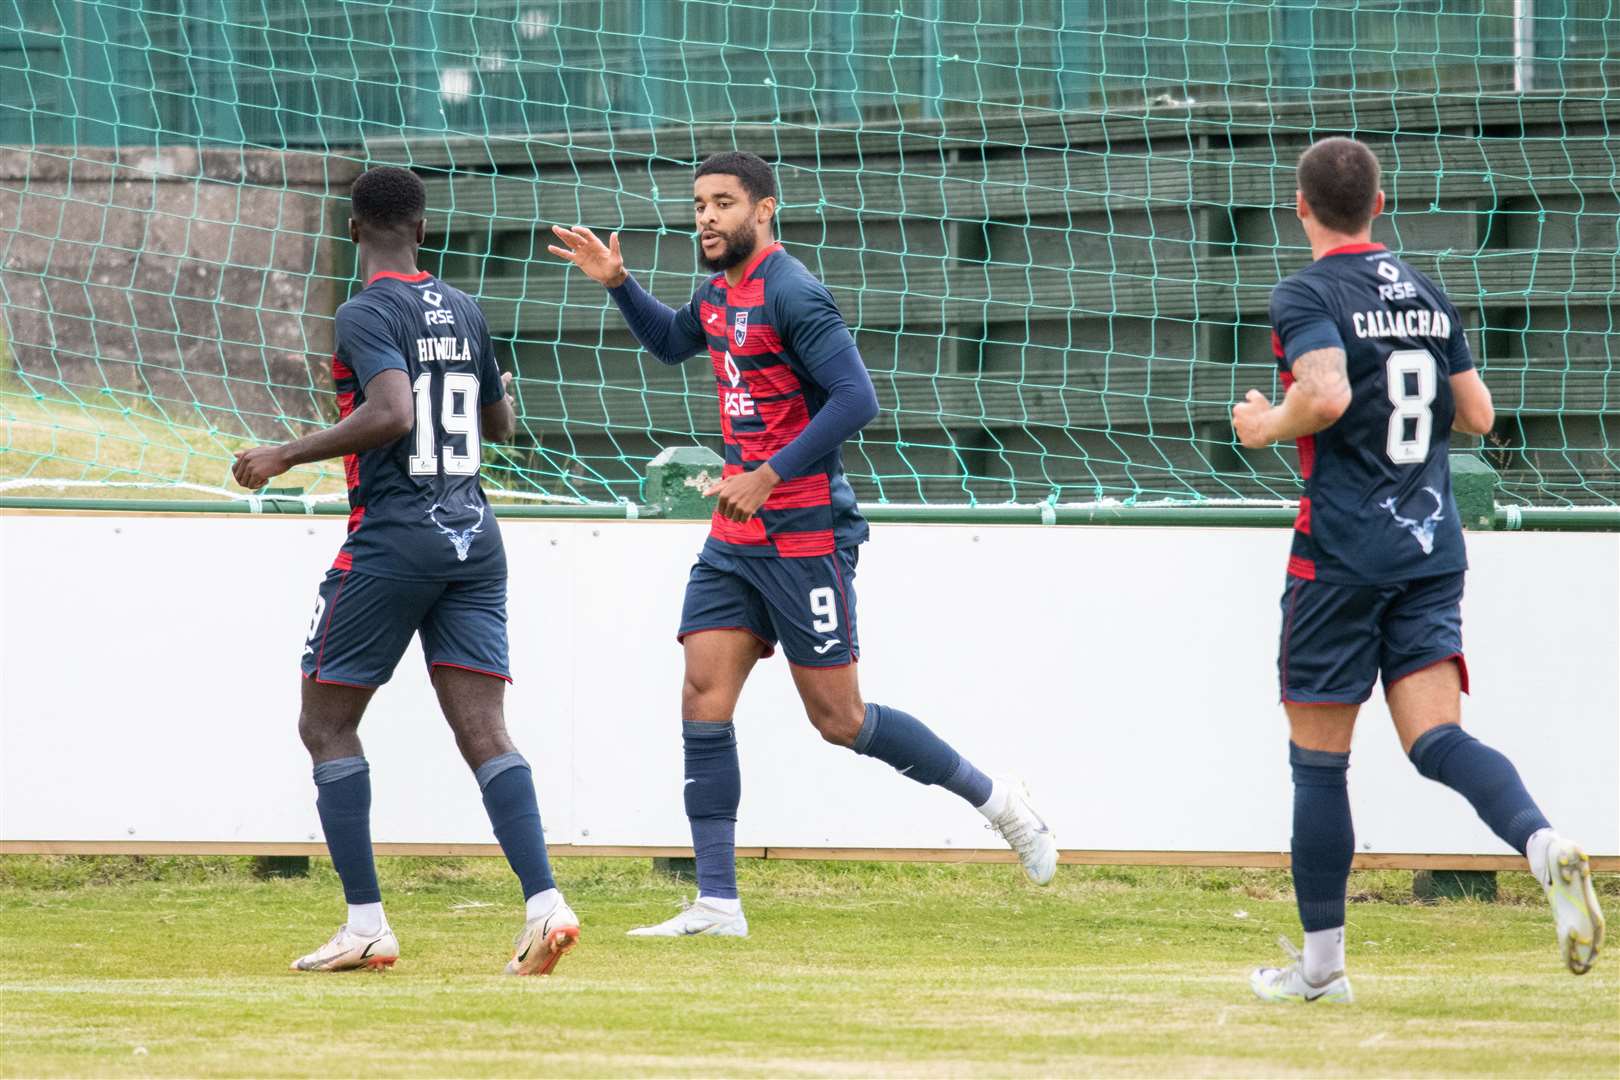 Dominic Samuel celebrates after scoring the equaliser for Ross County...Buckie Thistle (1) vs Ross County (1) - Ross County win the penalty shootout - Premier Sports League Cup at Victoria Park, Buckie, 09/07/2022...Picture: Daniel Forsyth..